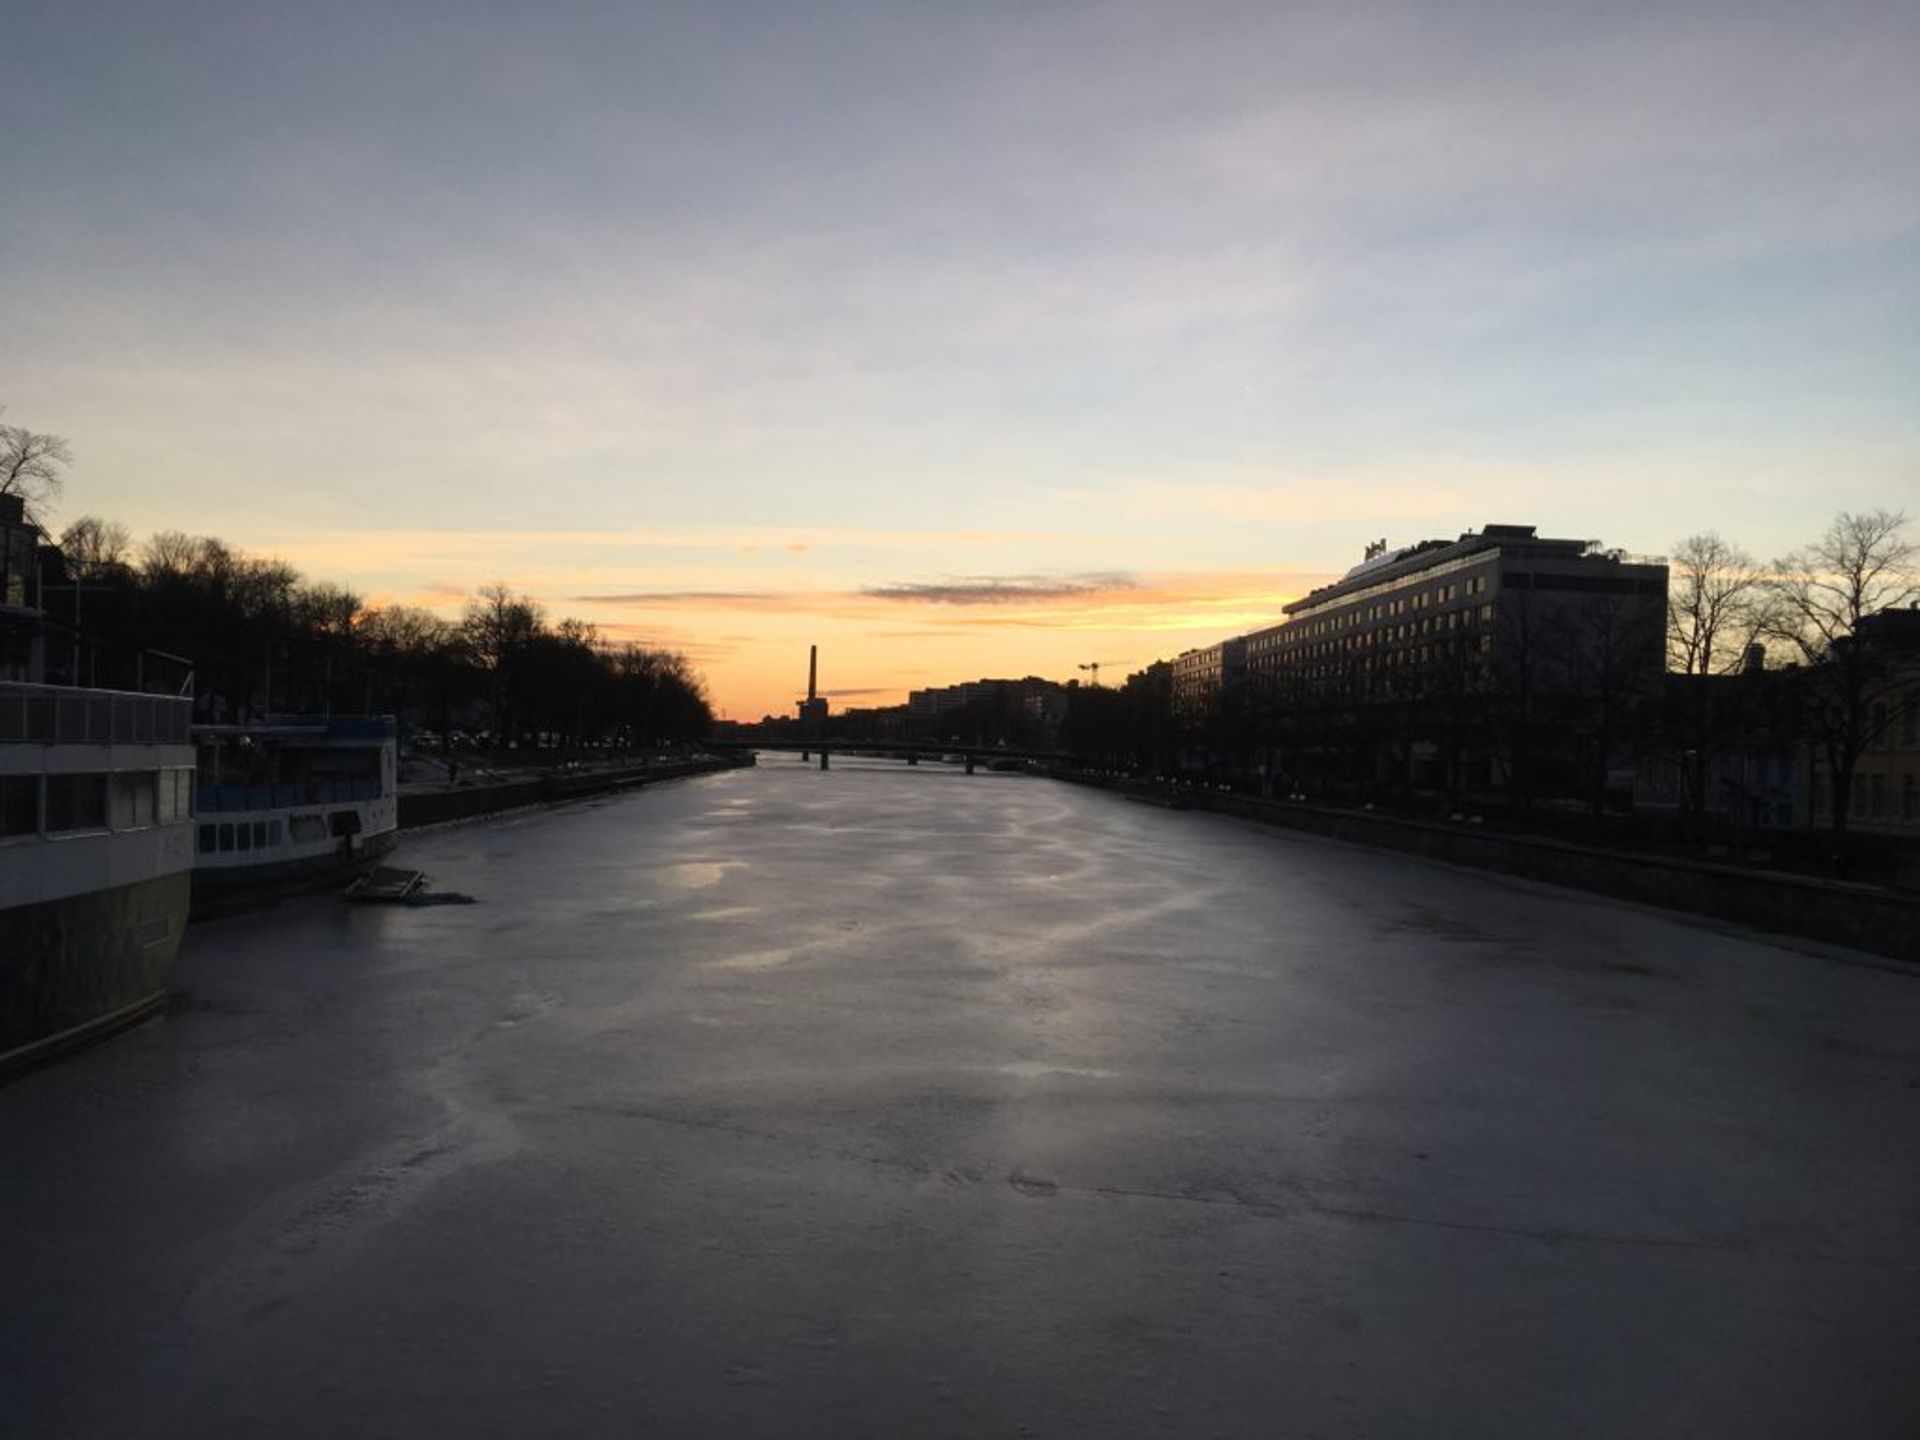 Sunset over the frozen river in Turku.